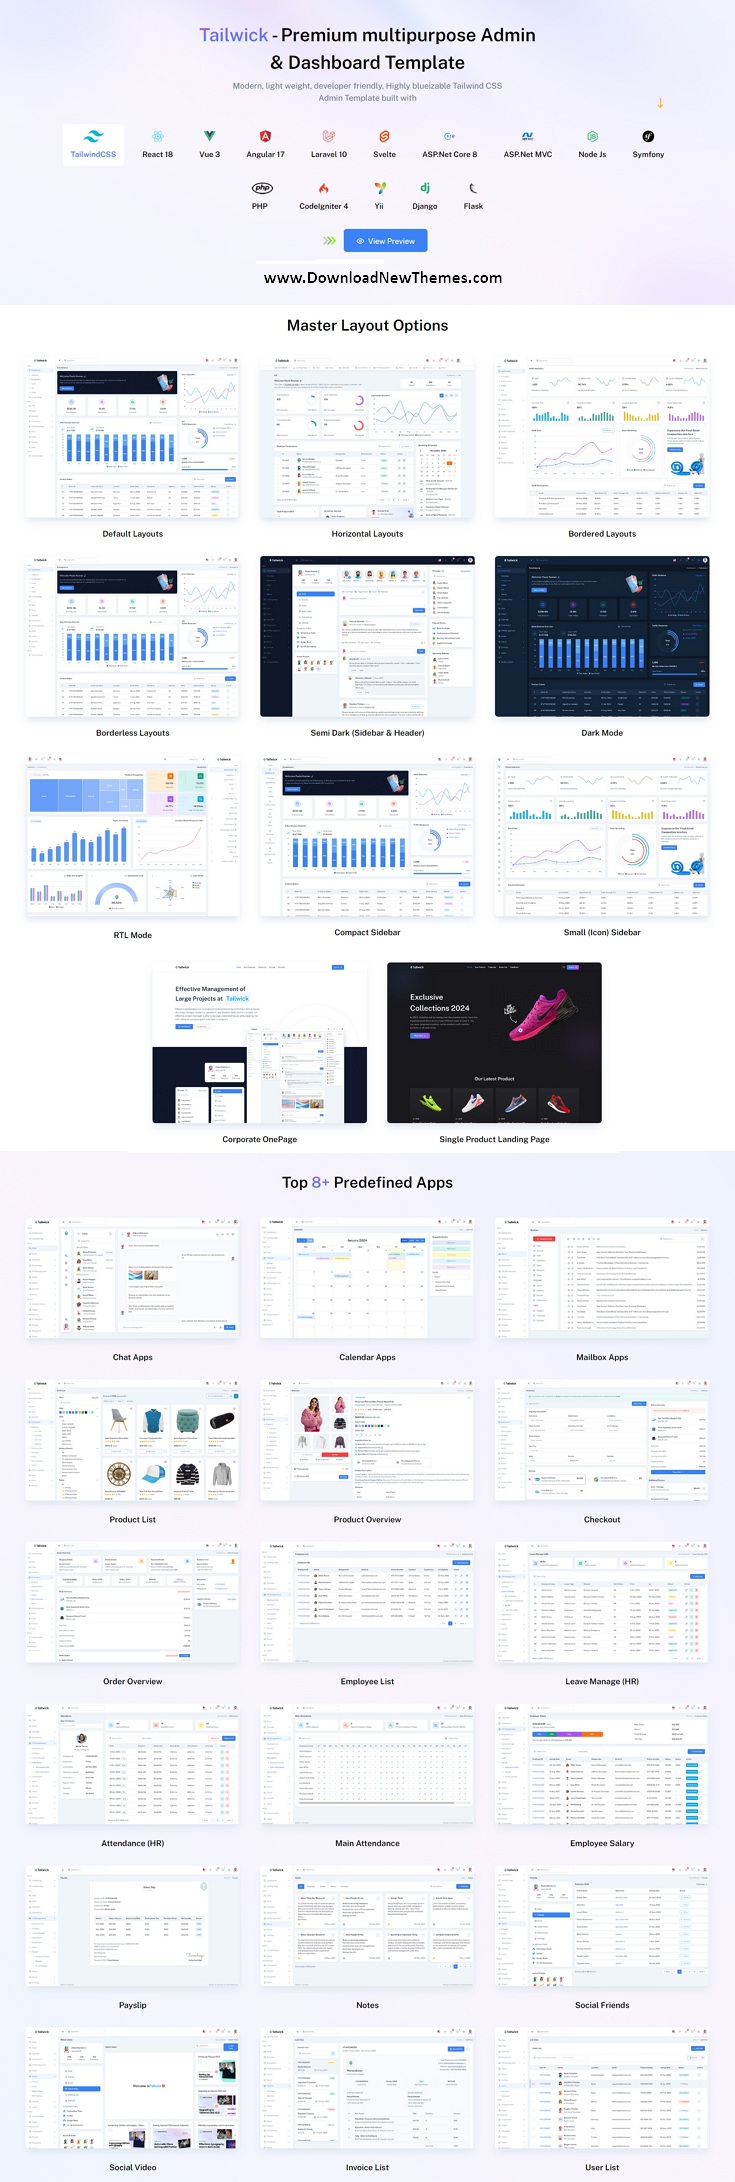 Tailwick - Tailwind CSS Admin & Dashboard Template Review